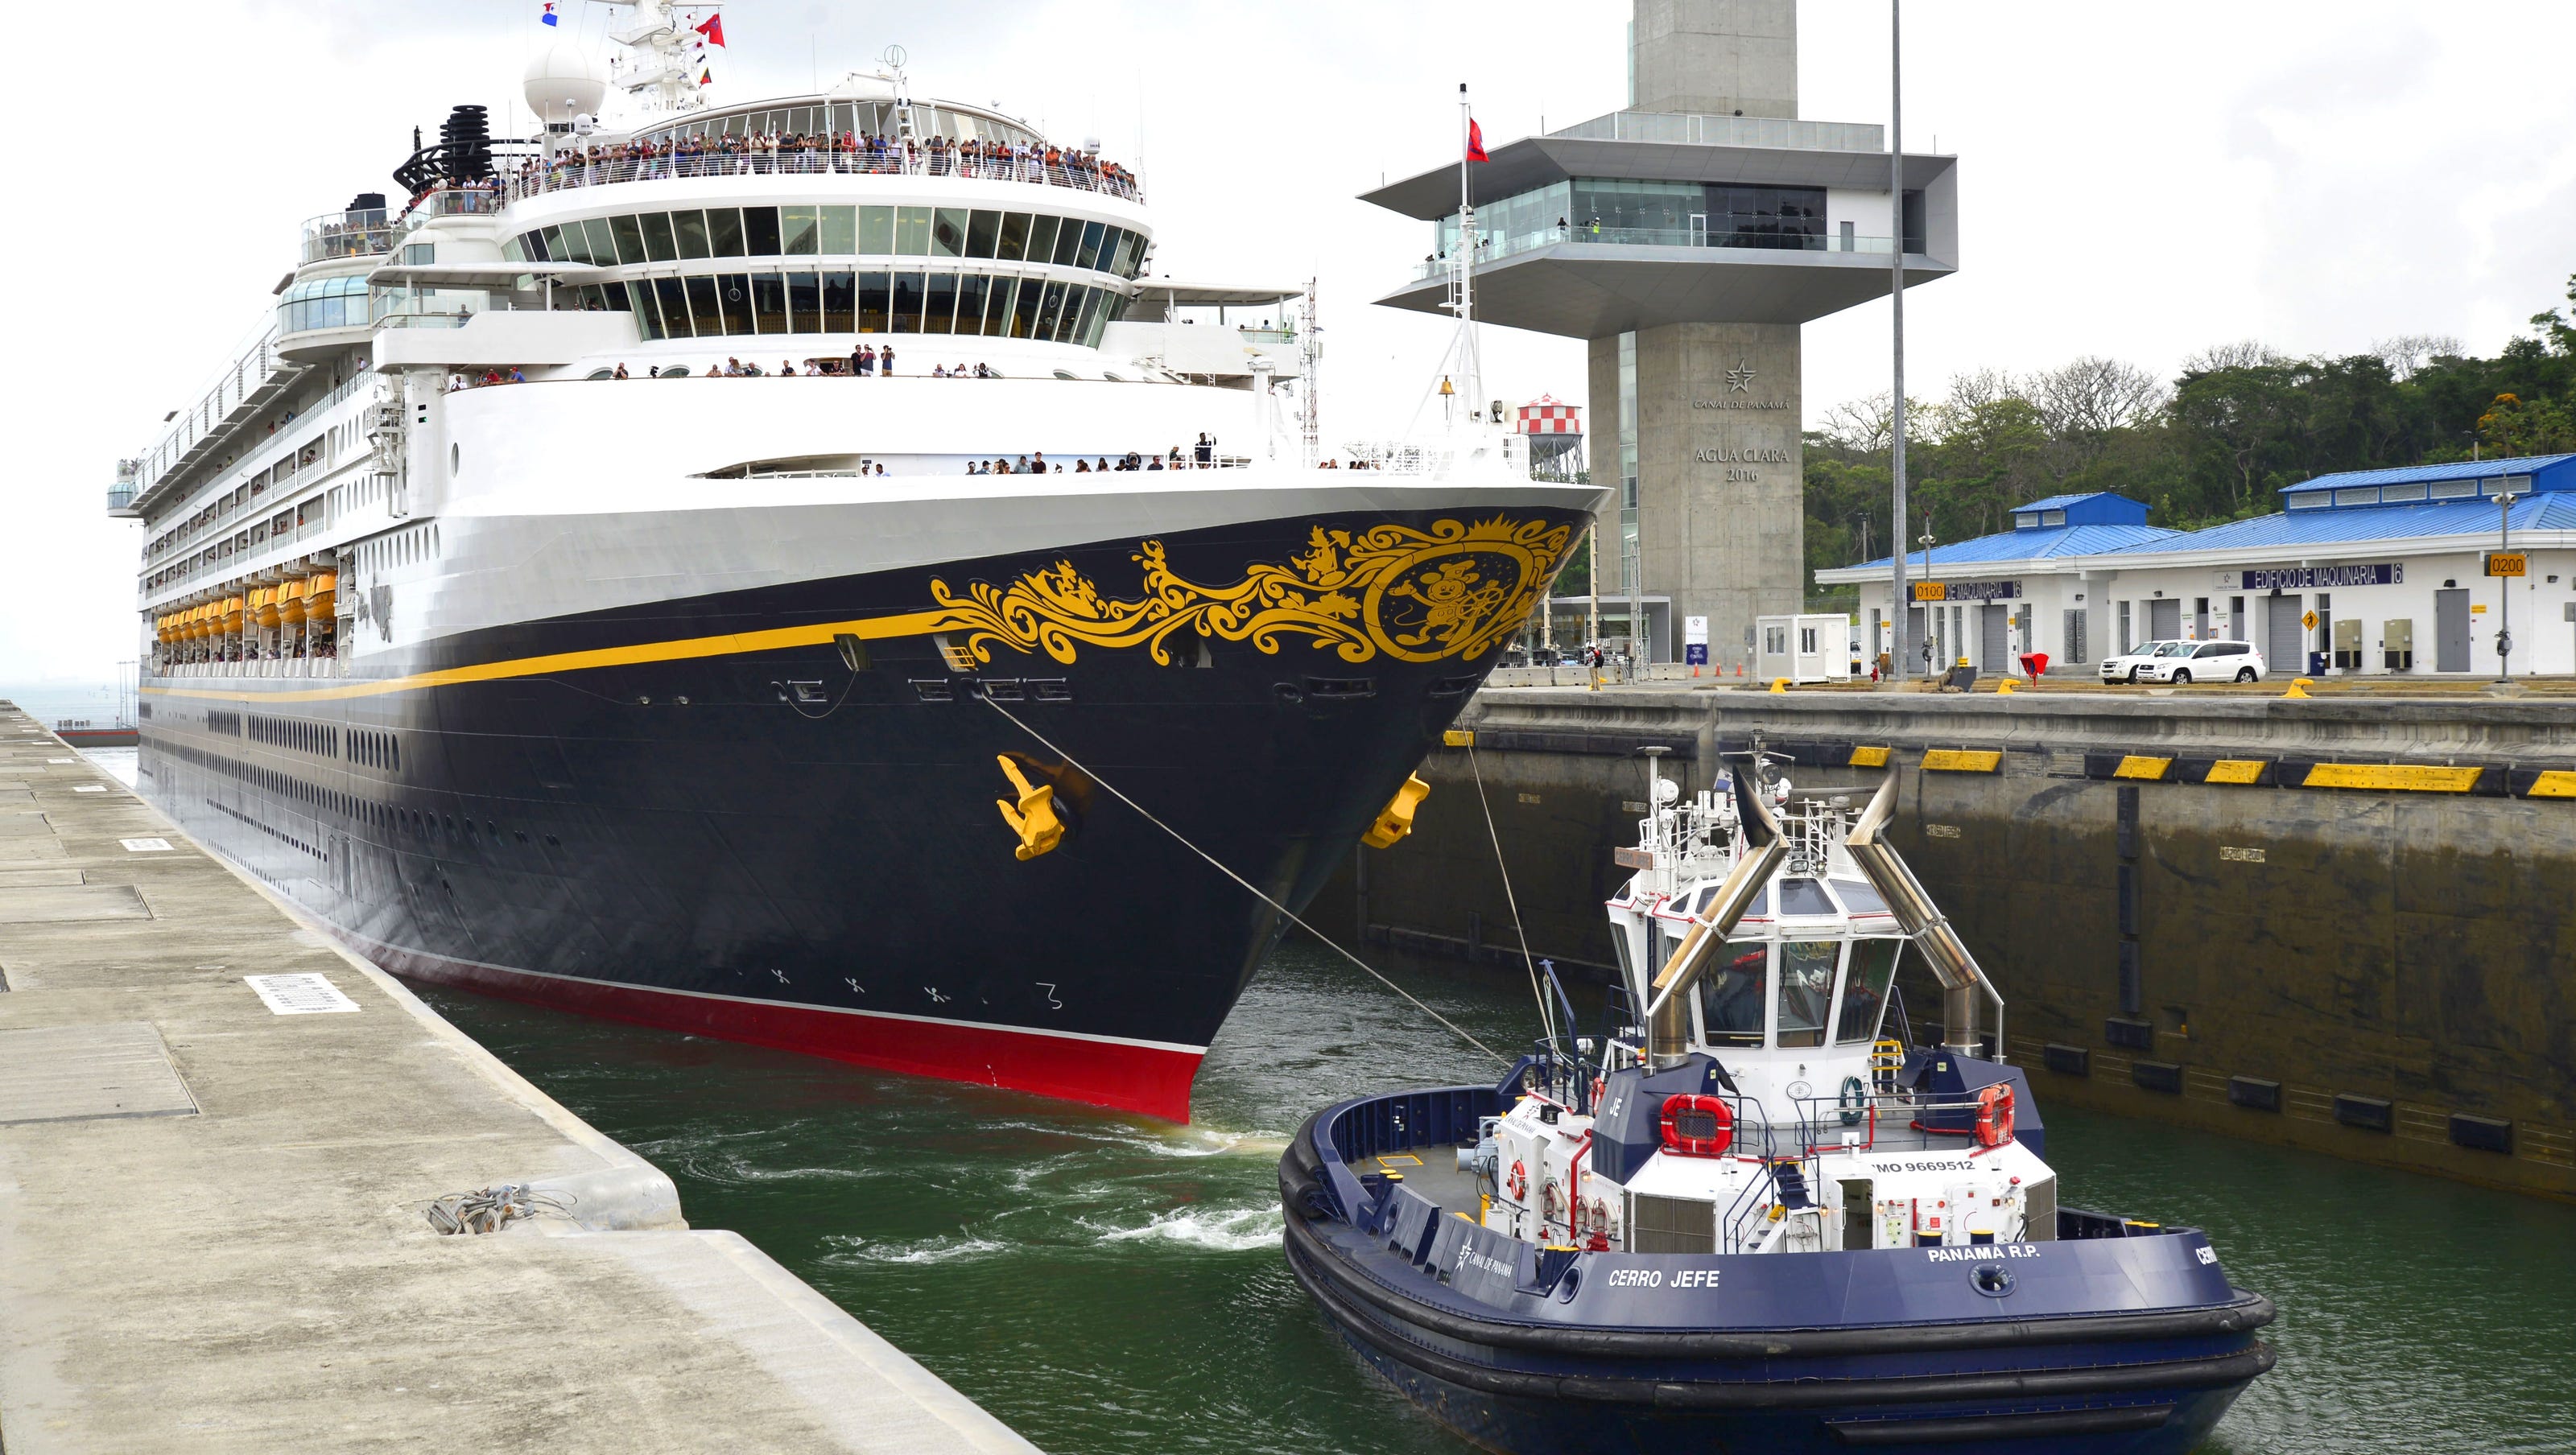 In a first, a cruise ship uses new Panama Canal locks